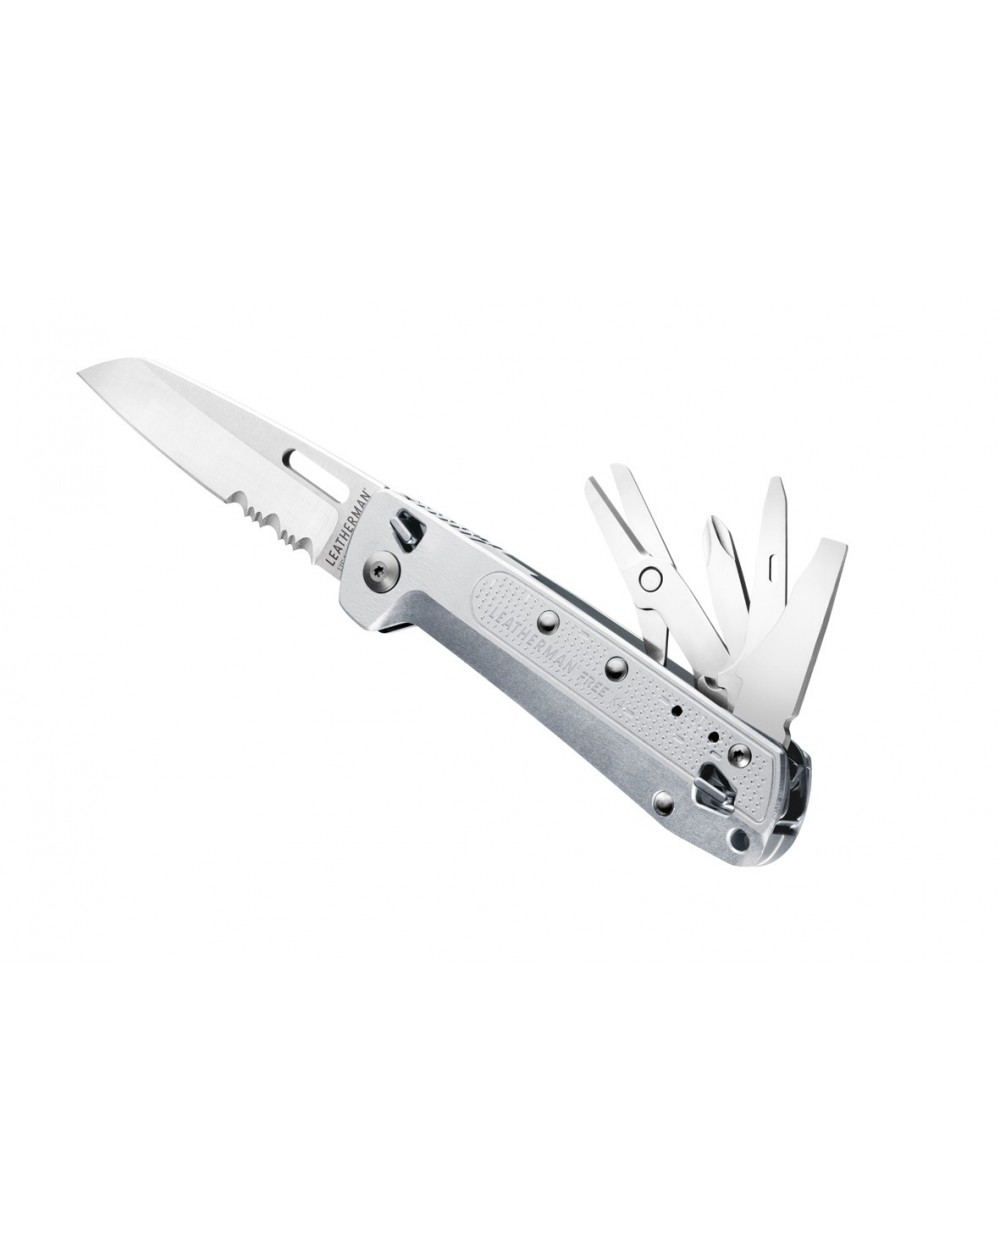 leatherman-pince-multifonctions-free-k4x-argent-832662-2